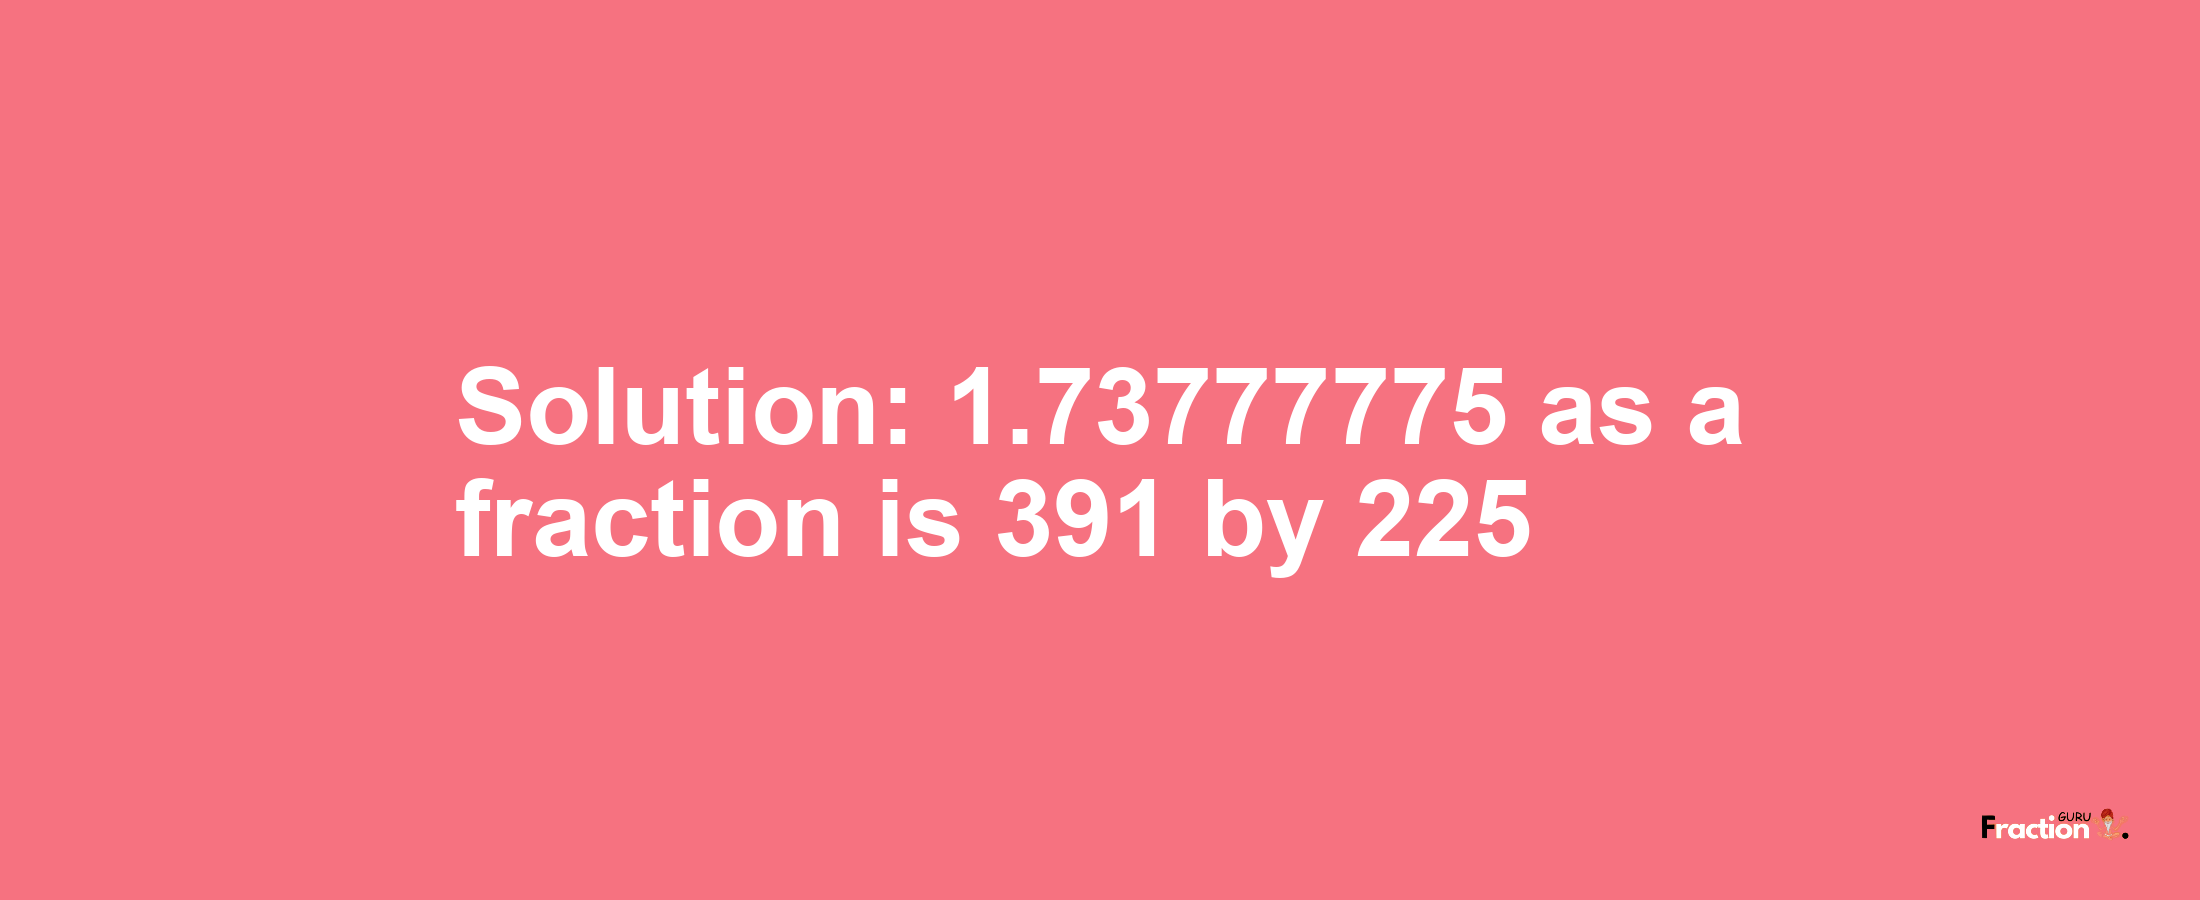 Solution:1.73777775 as a fraction is 391/225